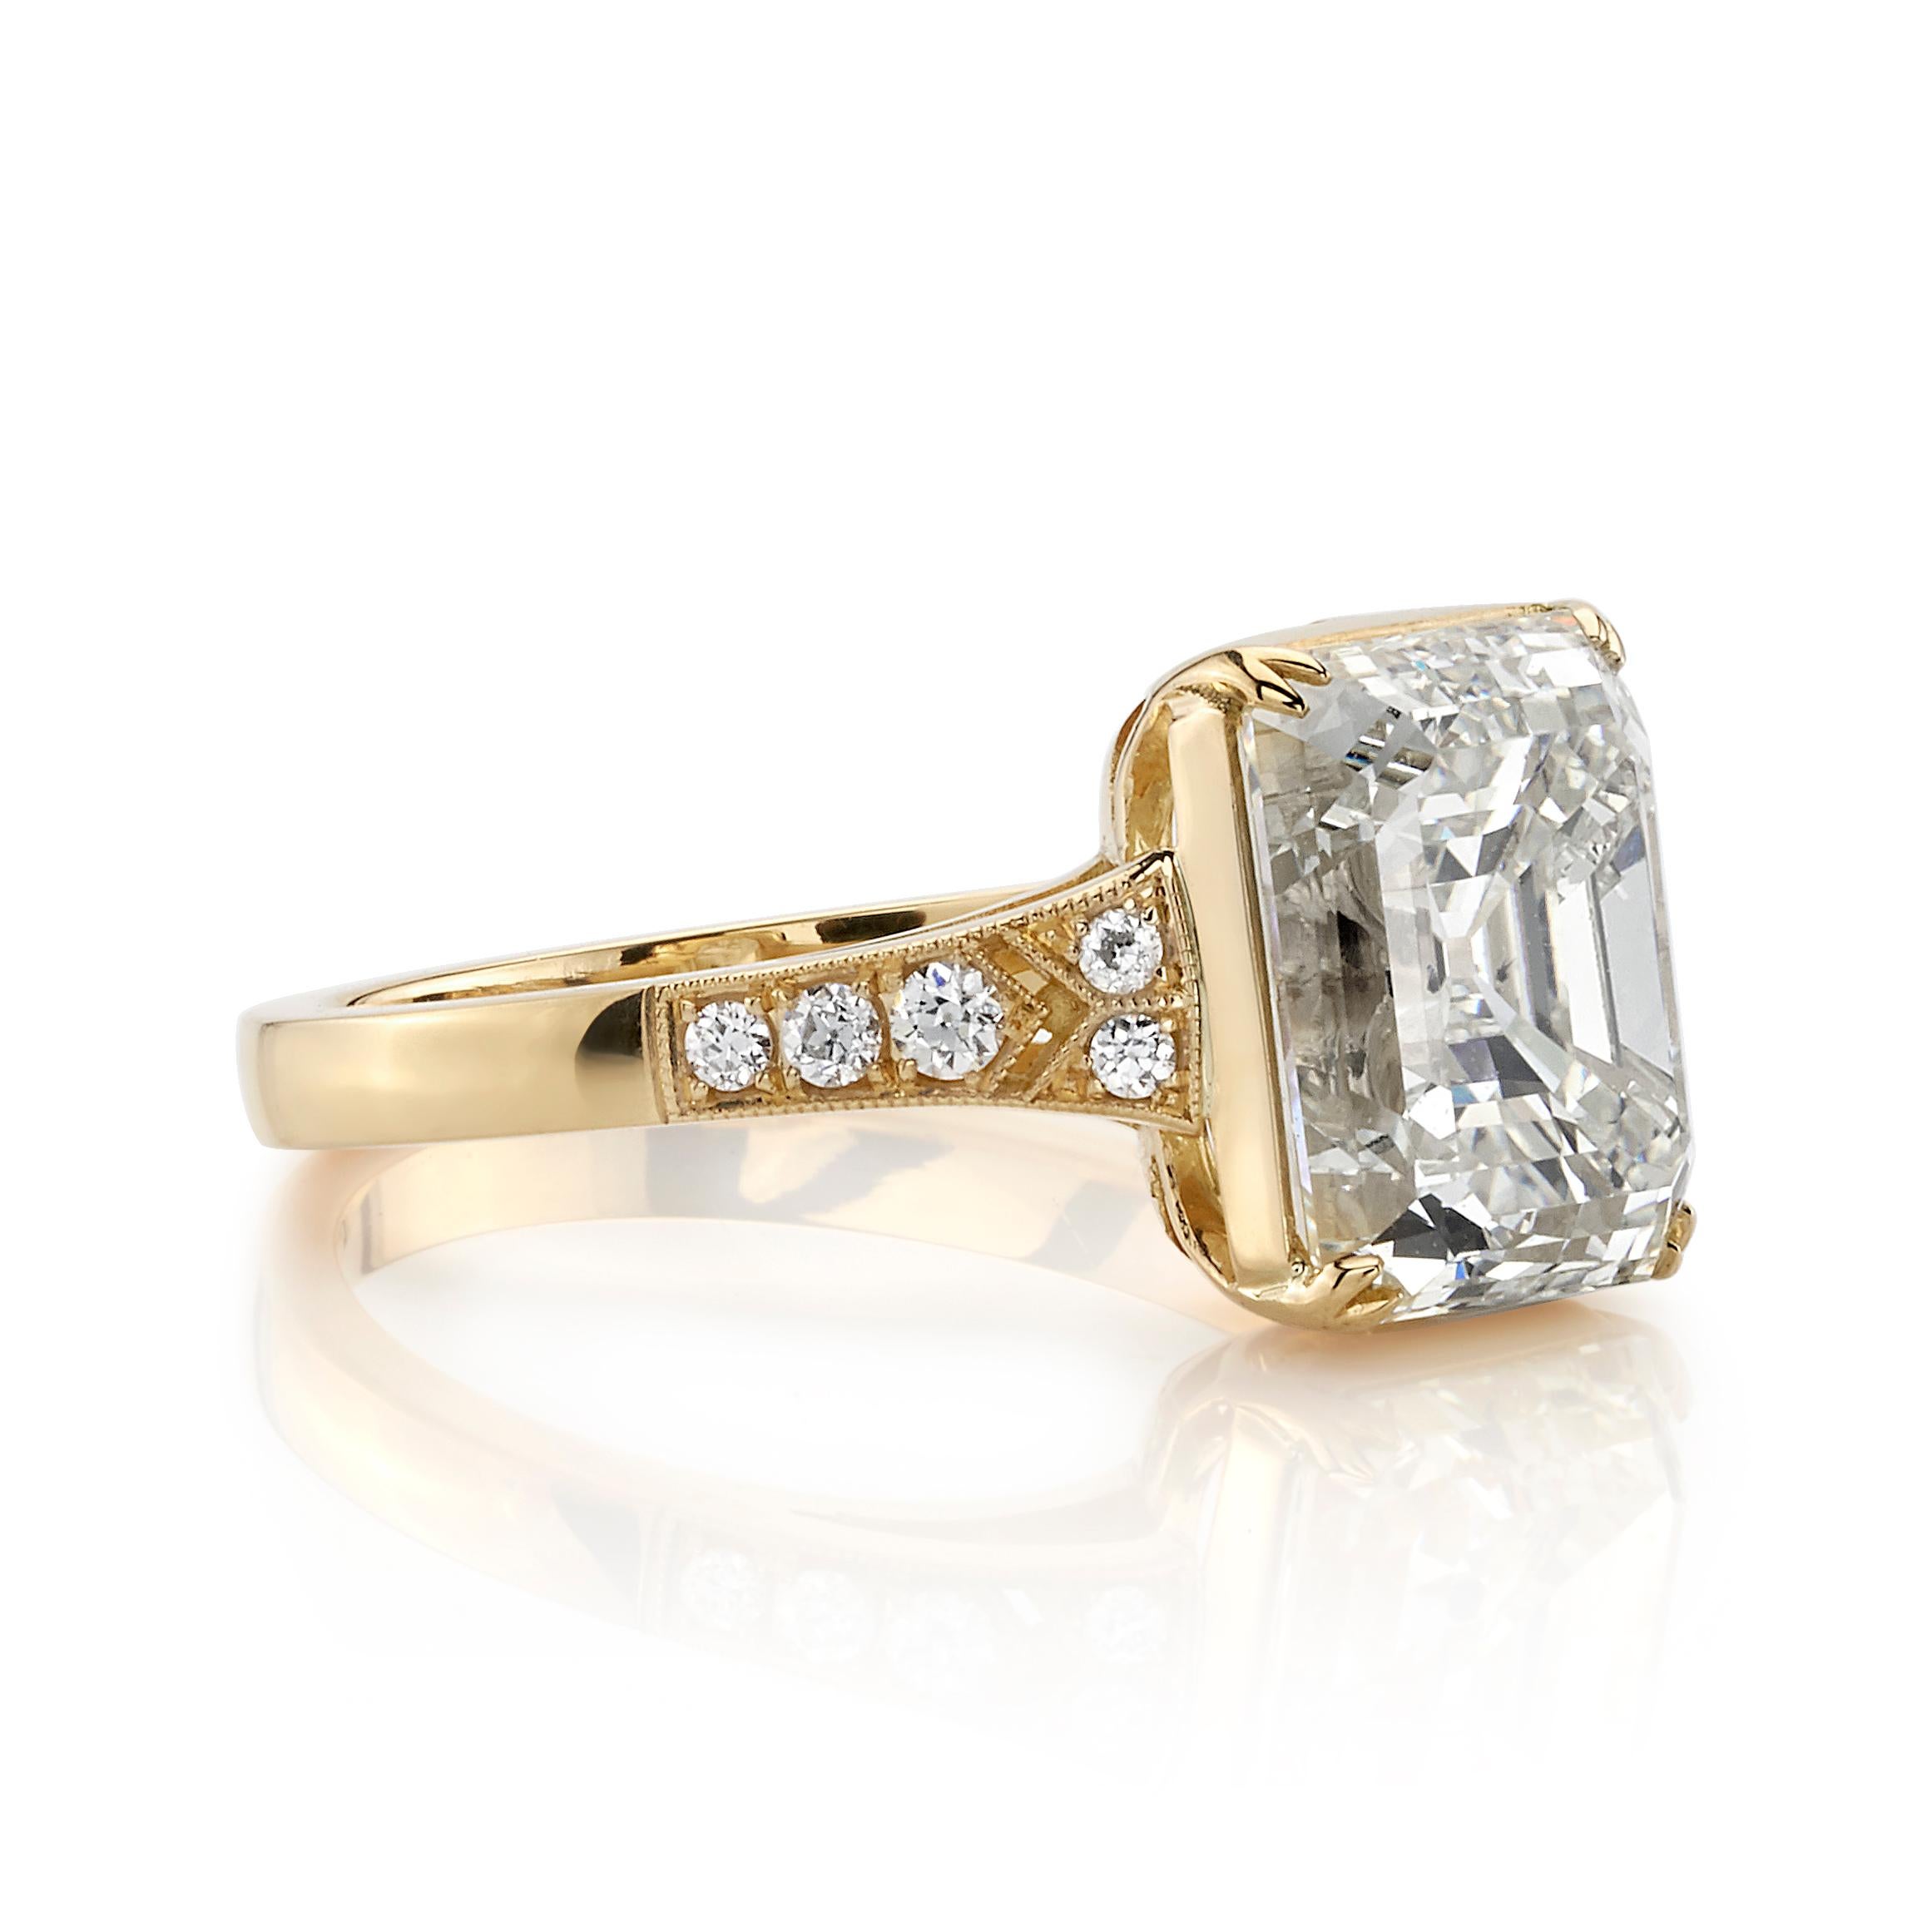 4.39ct M/SI1 GIA certified vintage Cushion cut diamond with 0.10ctw accent diamonds set in a handcrafted 18K yellow gold mounting. Ring is currently a size 6 and can be sized to fit.